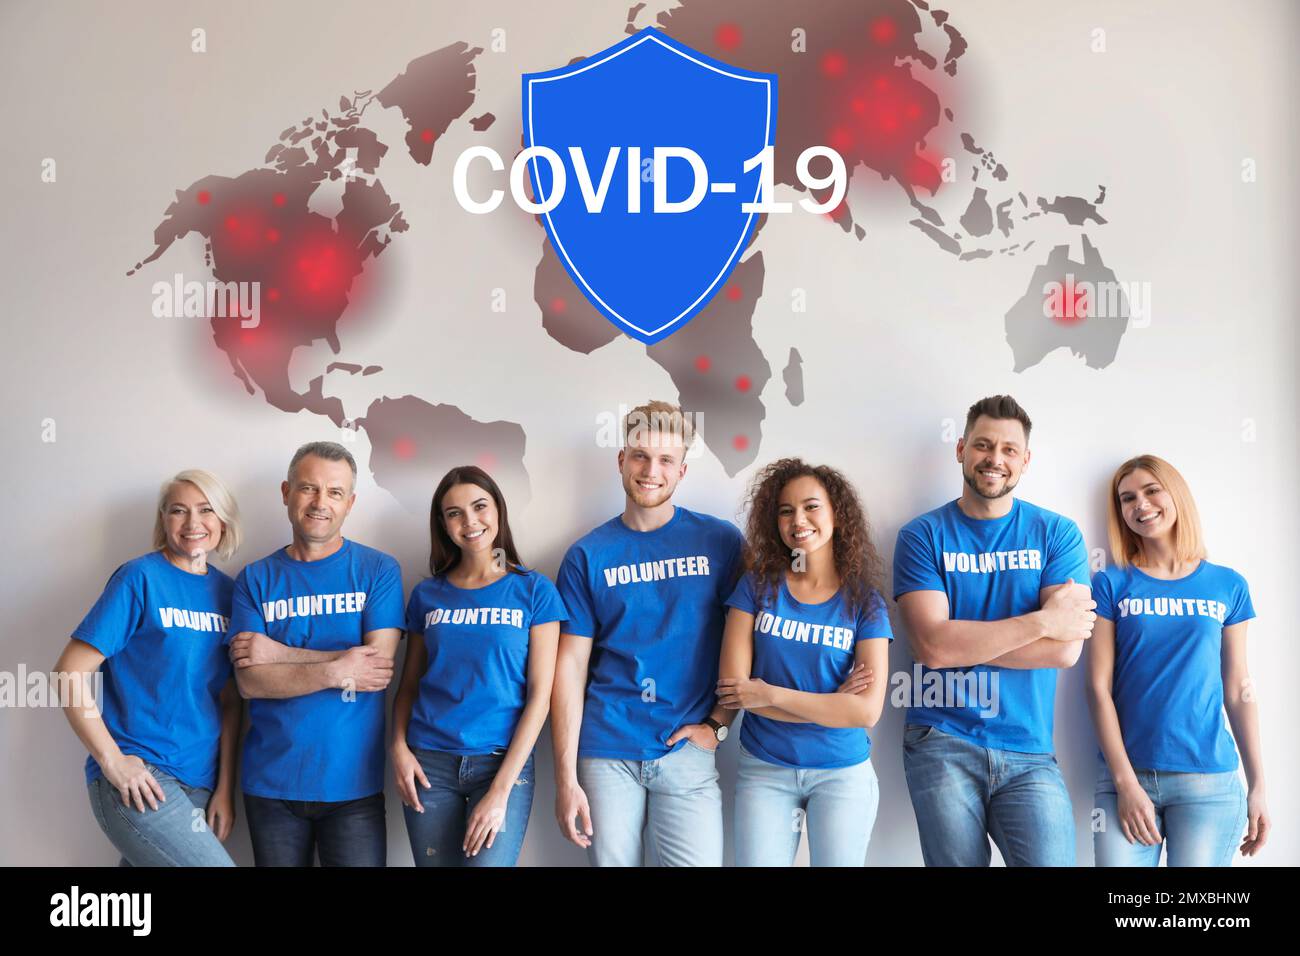 Volunteers uniting to help during COVID-19 outbreak. Group of people on light background, world map and shield illustrations Stock Photo